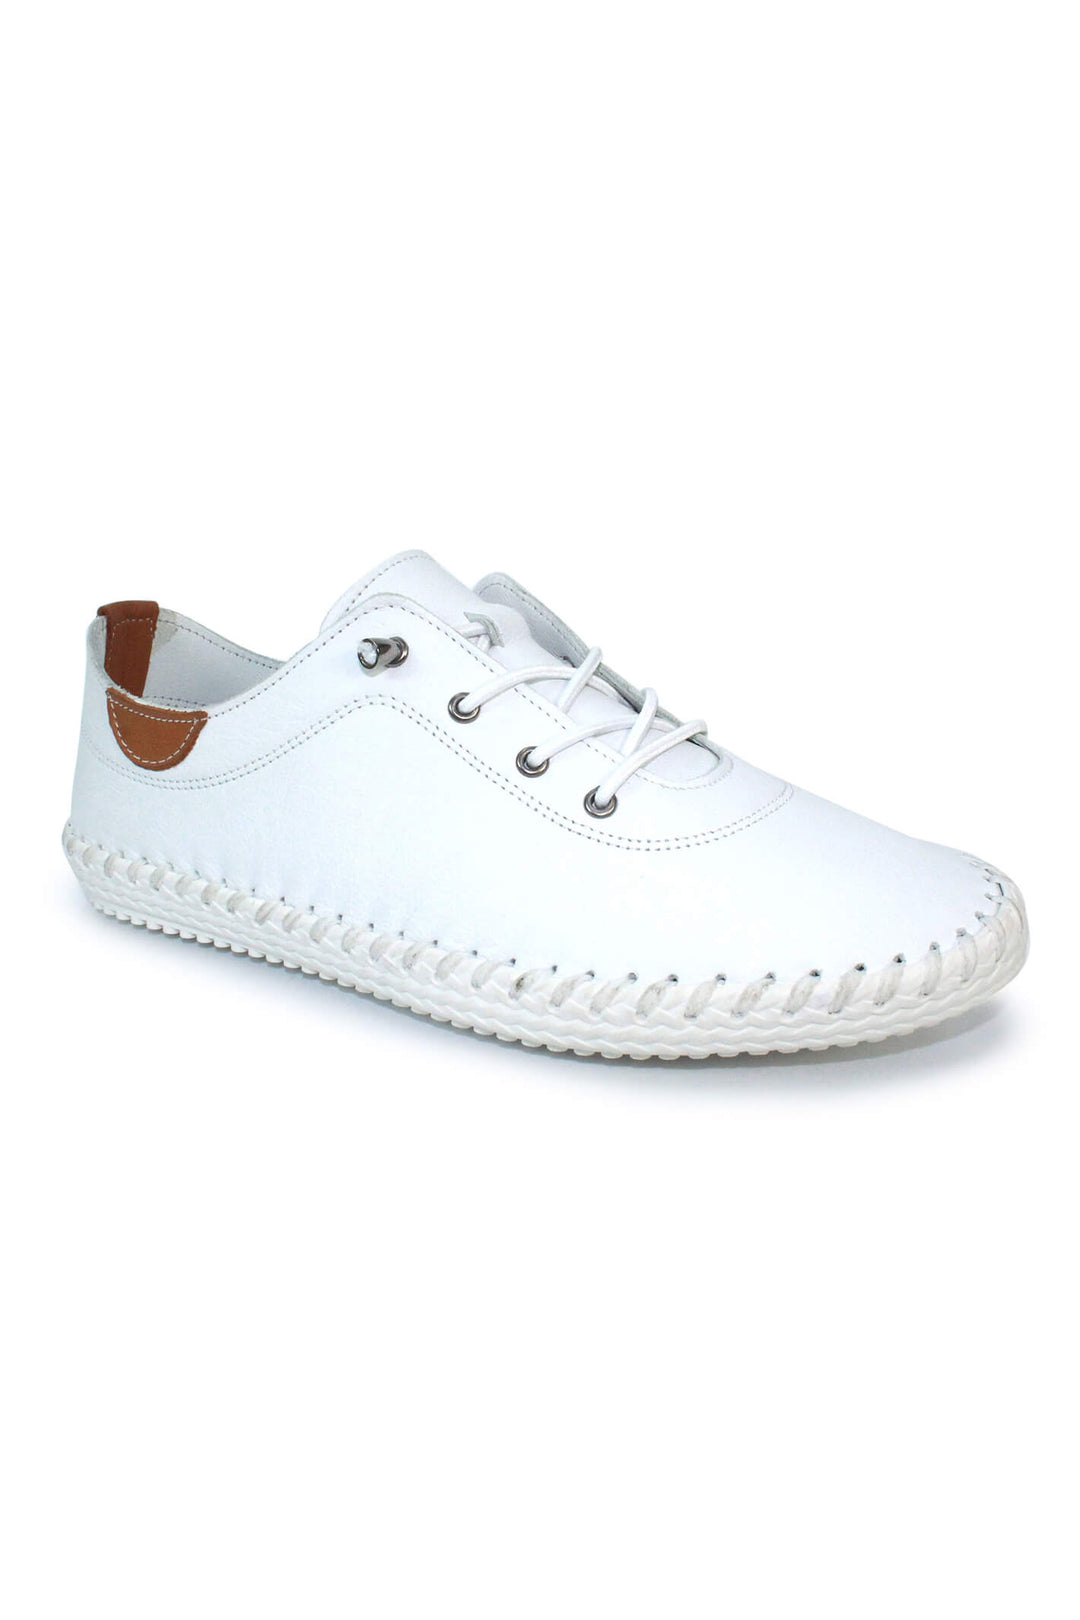 Lunar St Ives FLE030 Leather White Plimsoll - Shirley Allum Boutique